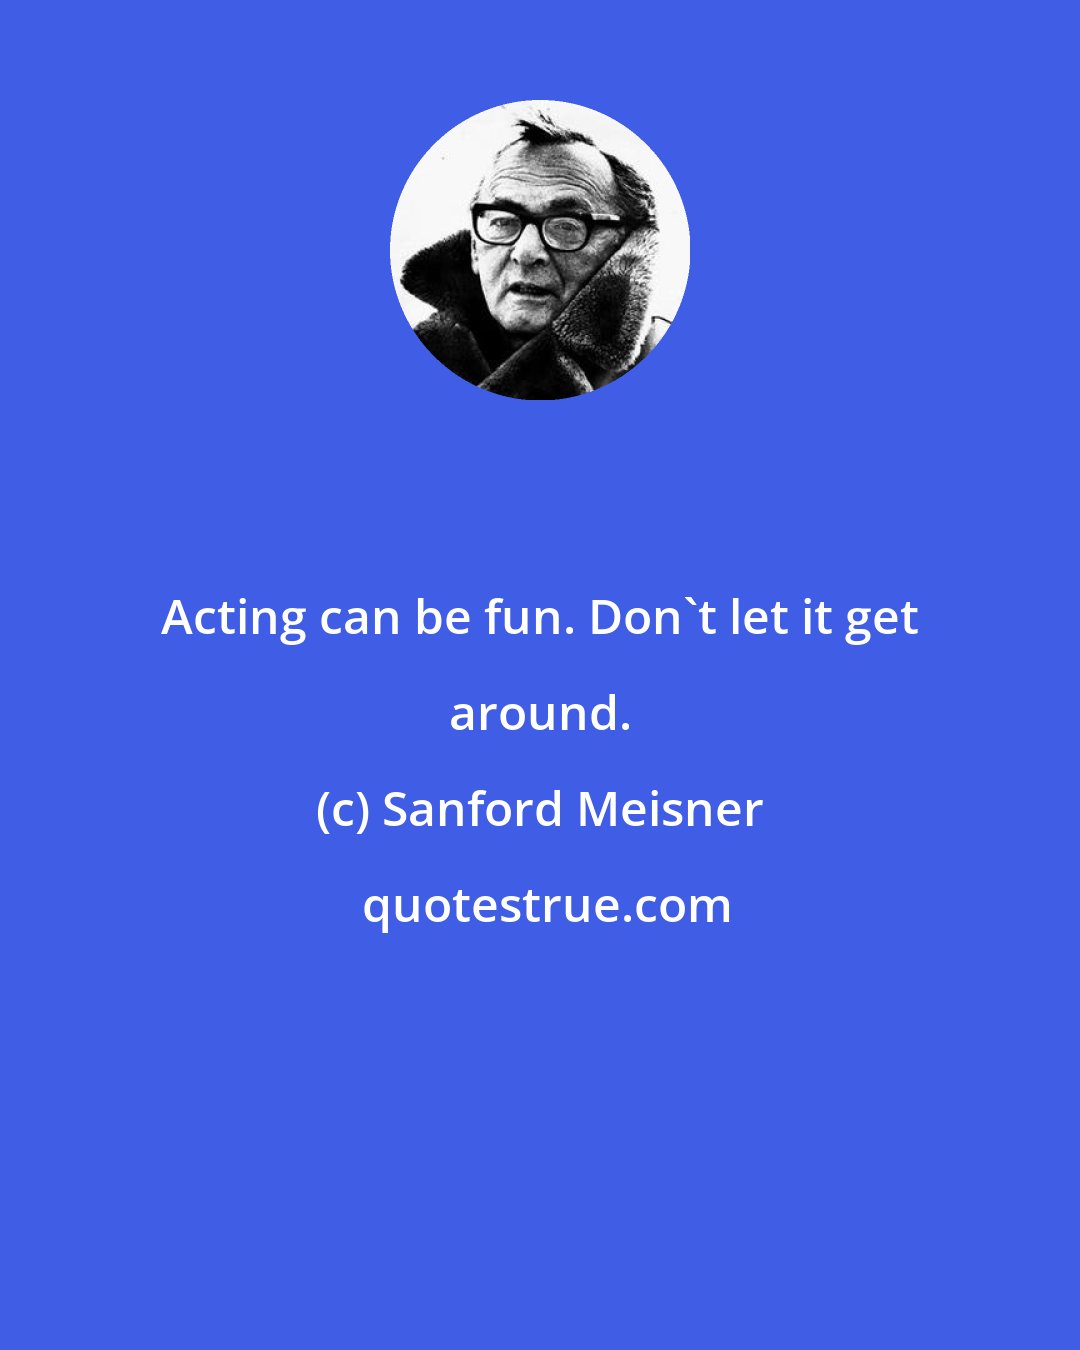 Sanford Meisner: Acting can be fun. Don't let it get around.